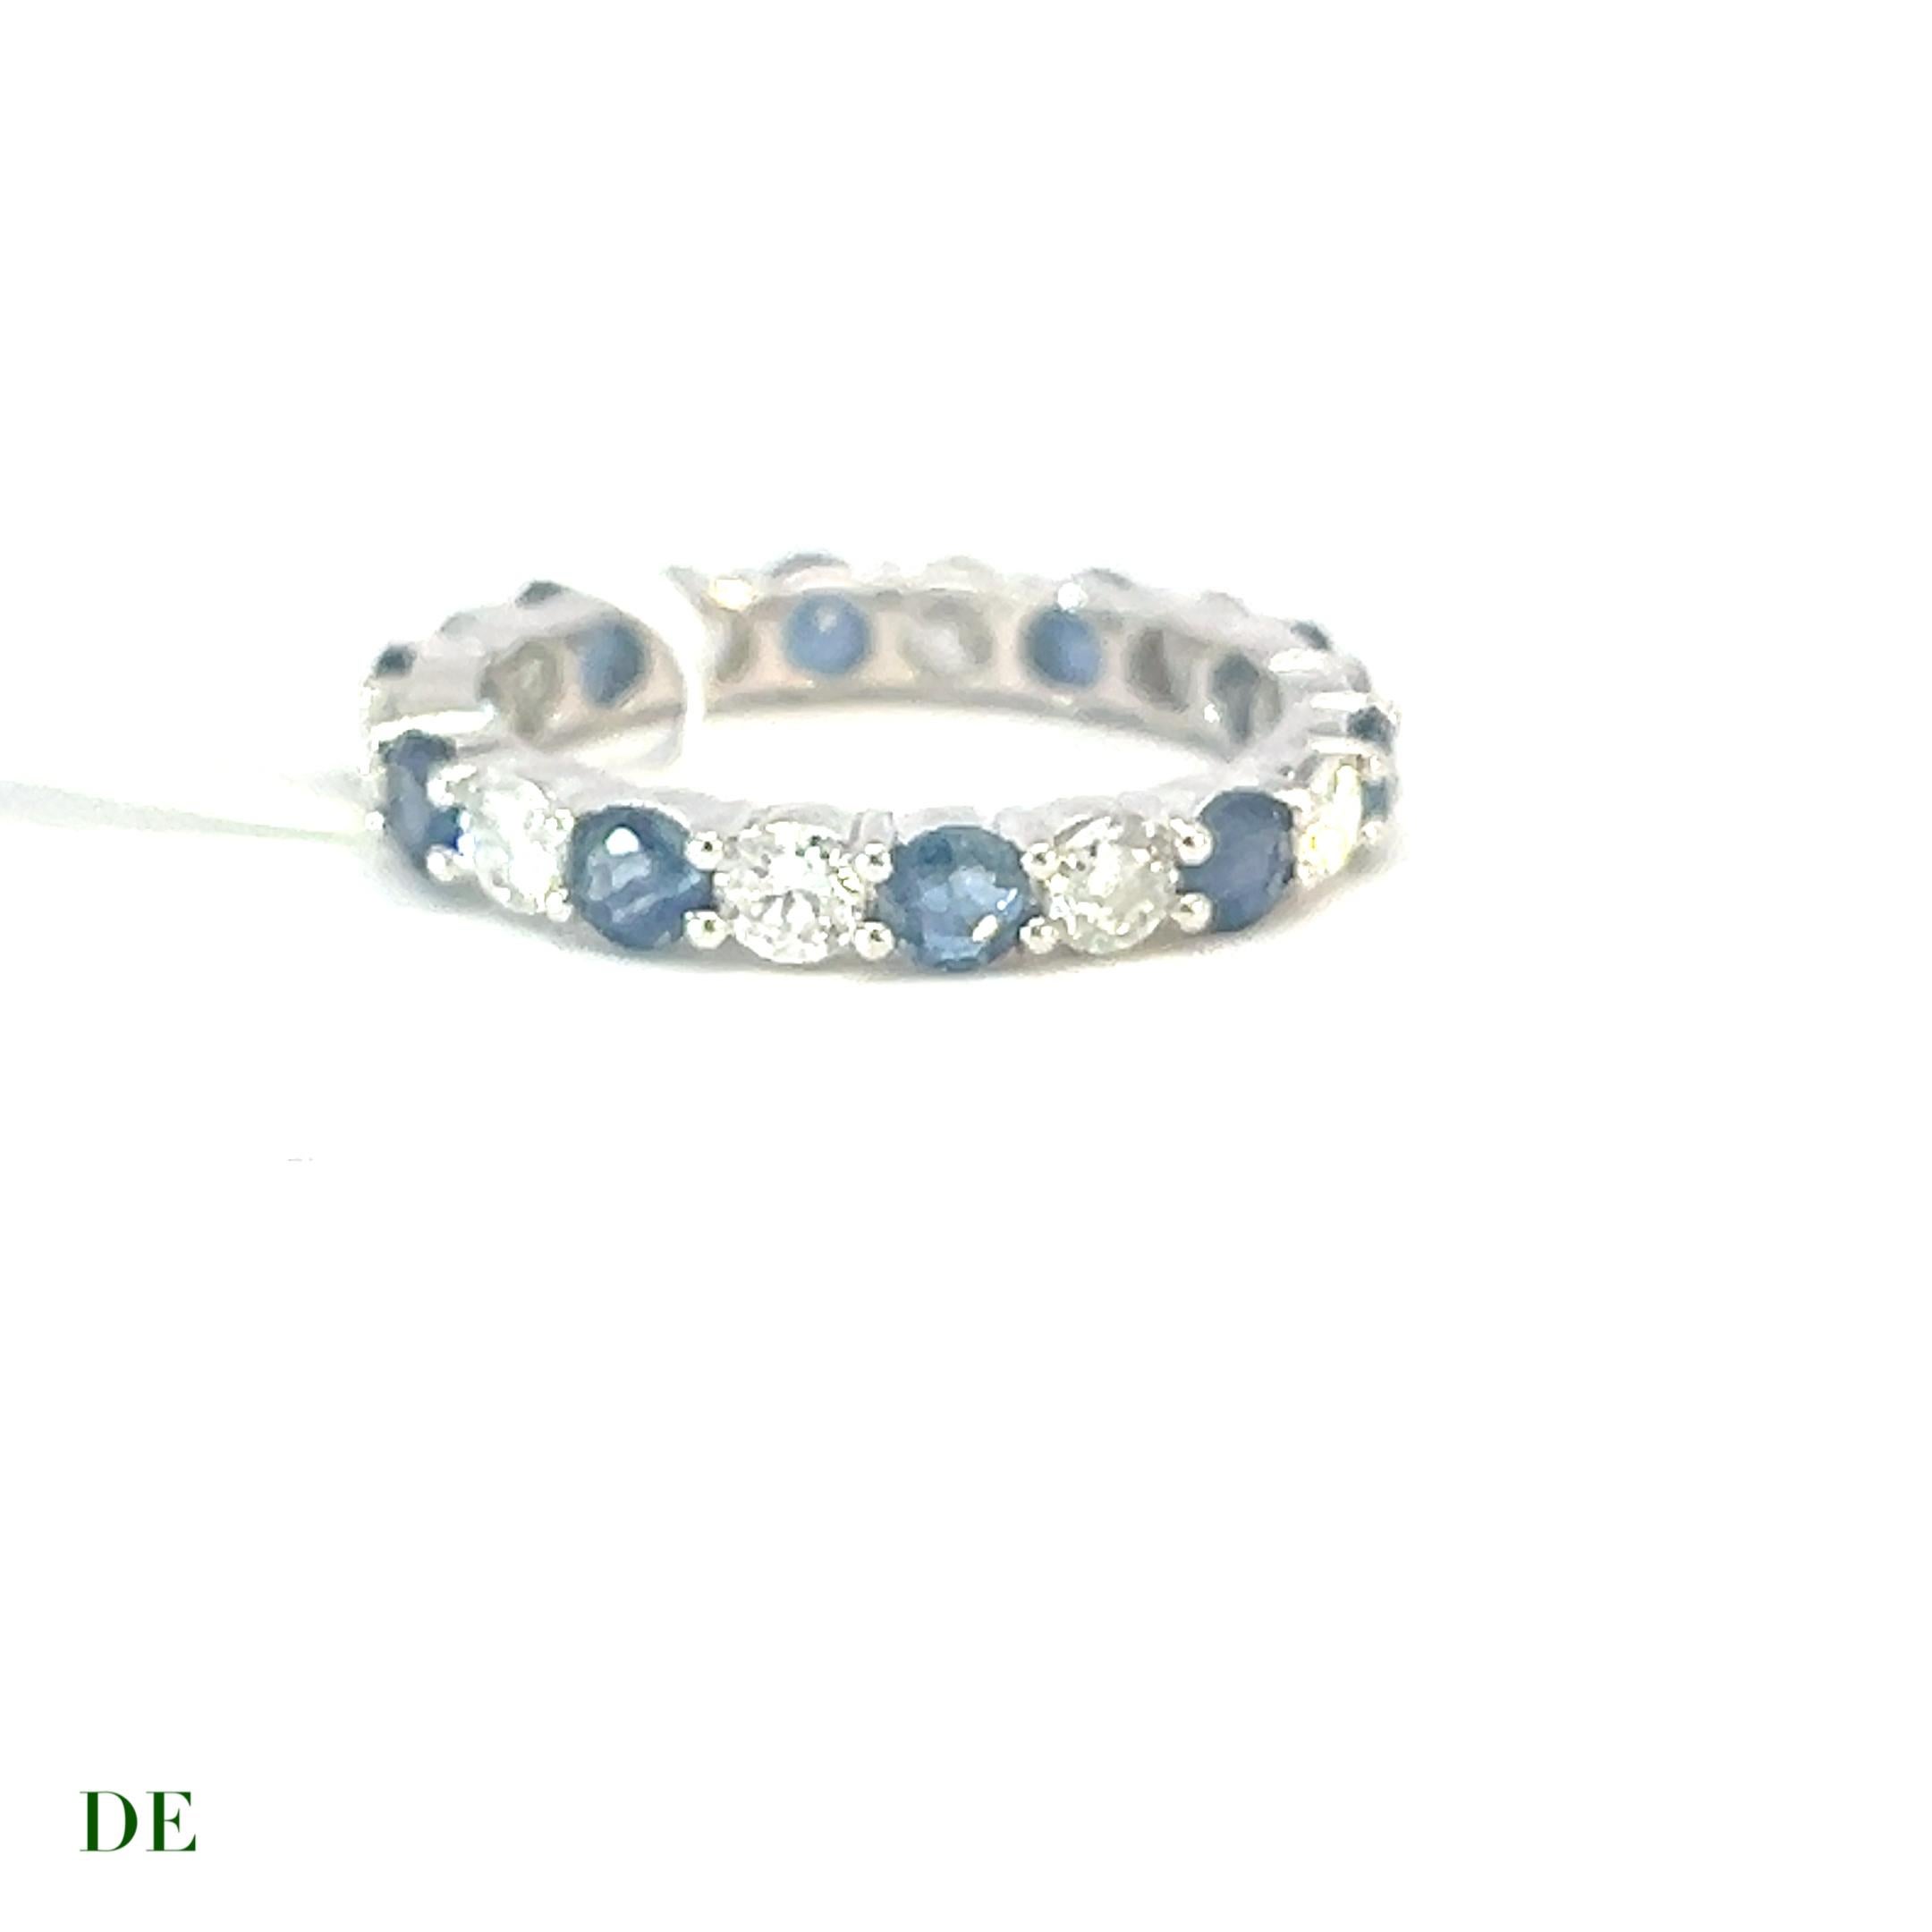 Classic 14k White Gold 1.415crt Diamond .97 Crt Blue Sapphire Eternity Band Ring

Introducing the breathtaking beauty of our Classic 14k White Gold Diamond and Blue Sapphire Eternity Band Ring. This extraordinary piece combines the brilliance of